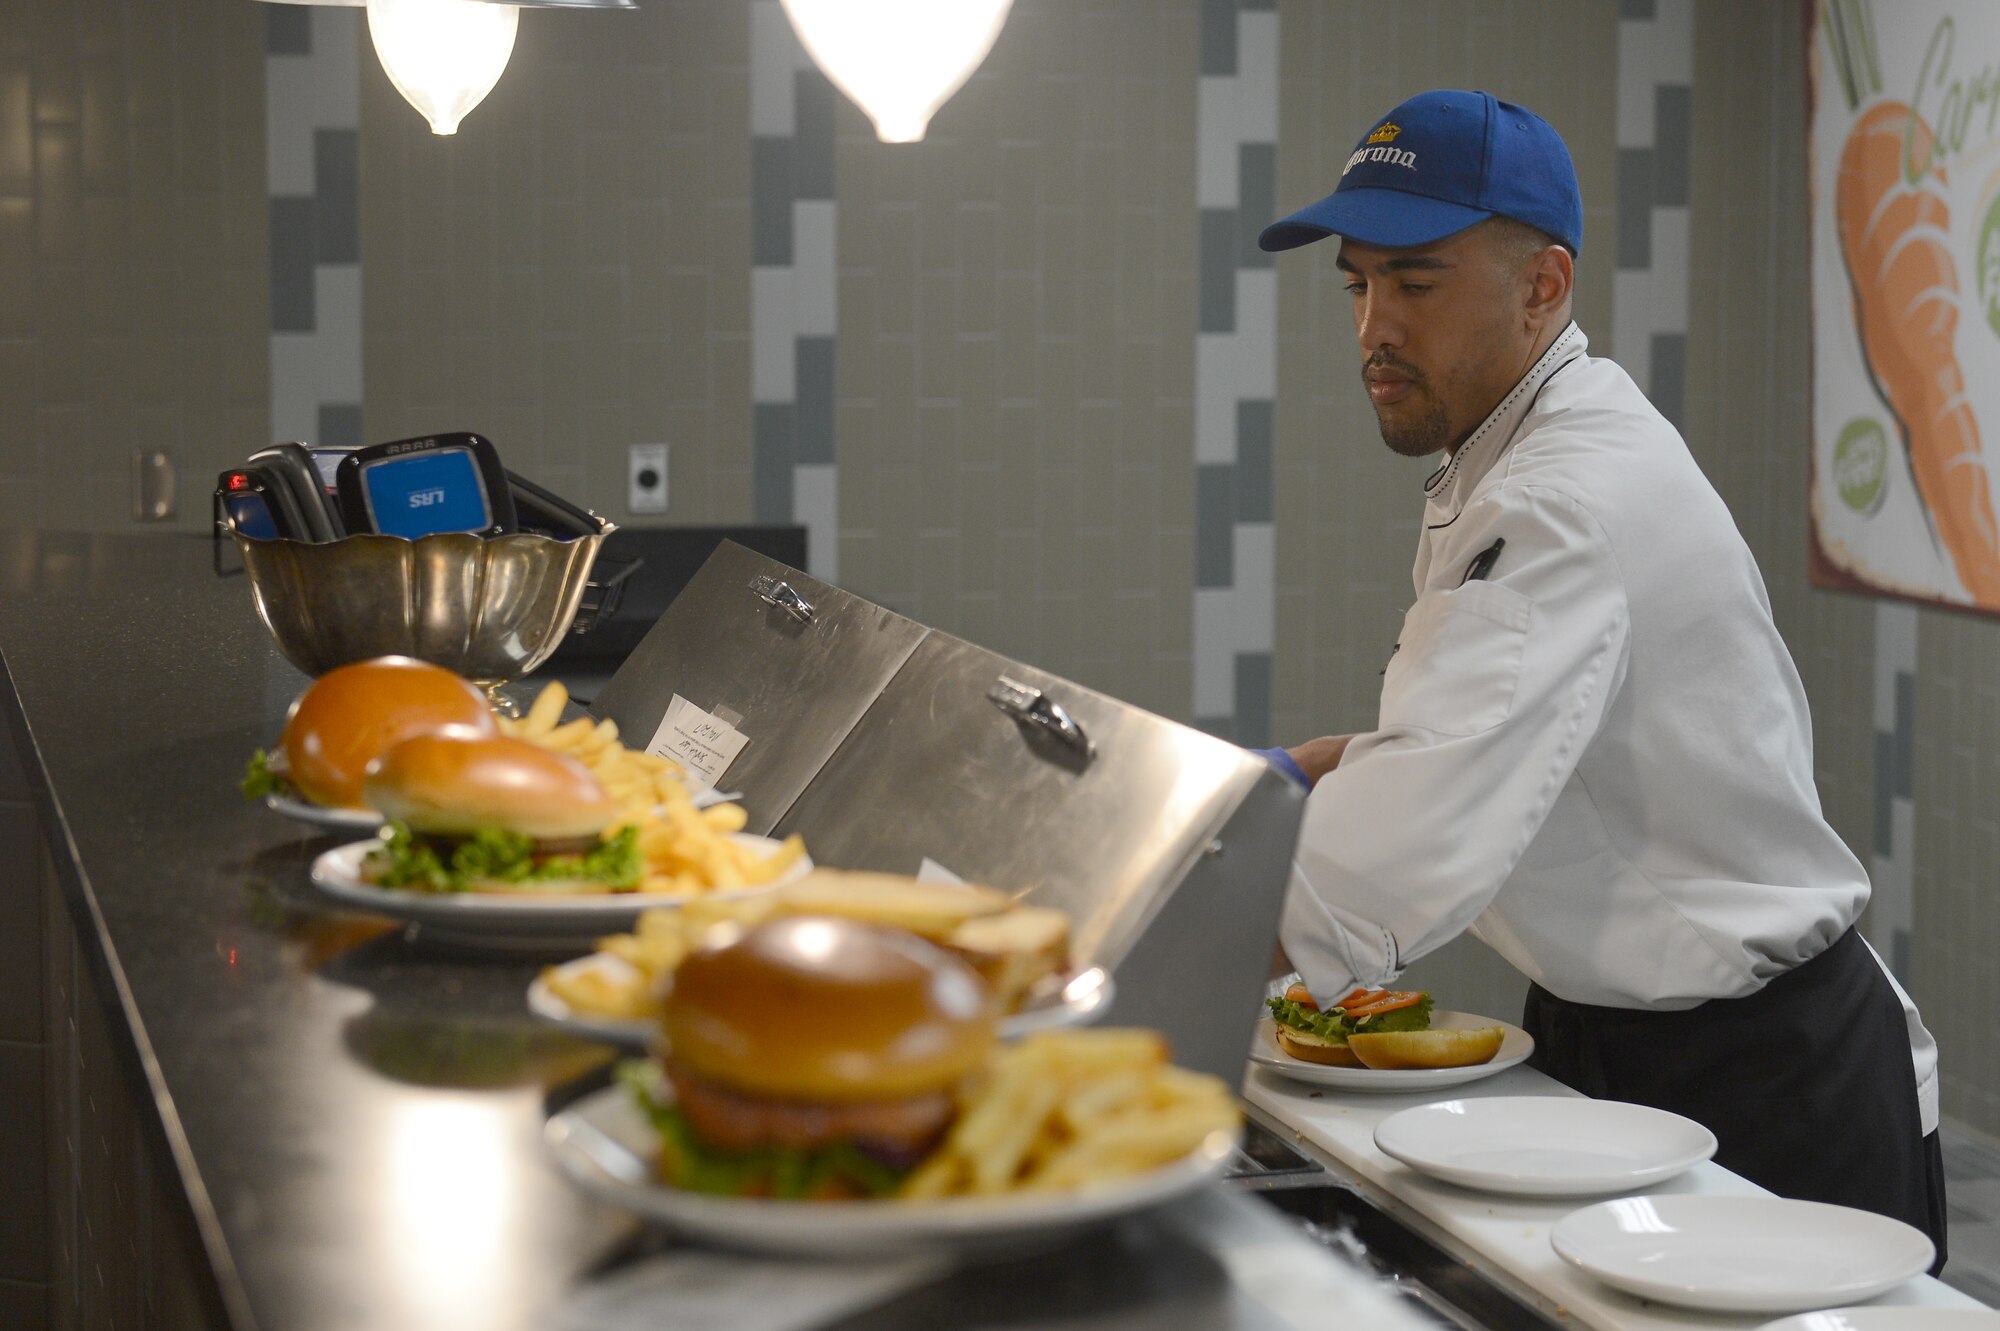 Derek Torrence, McChord Club executive chef, prepares a sandwich during lunch at McChord Grill, May 10, 2017 at Joint Base Lewis-McChord, Wash. Torrence has been the executive chef at McChord since May 2015. (U.S. Air Force photo/Senior Airman Divine Cox)